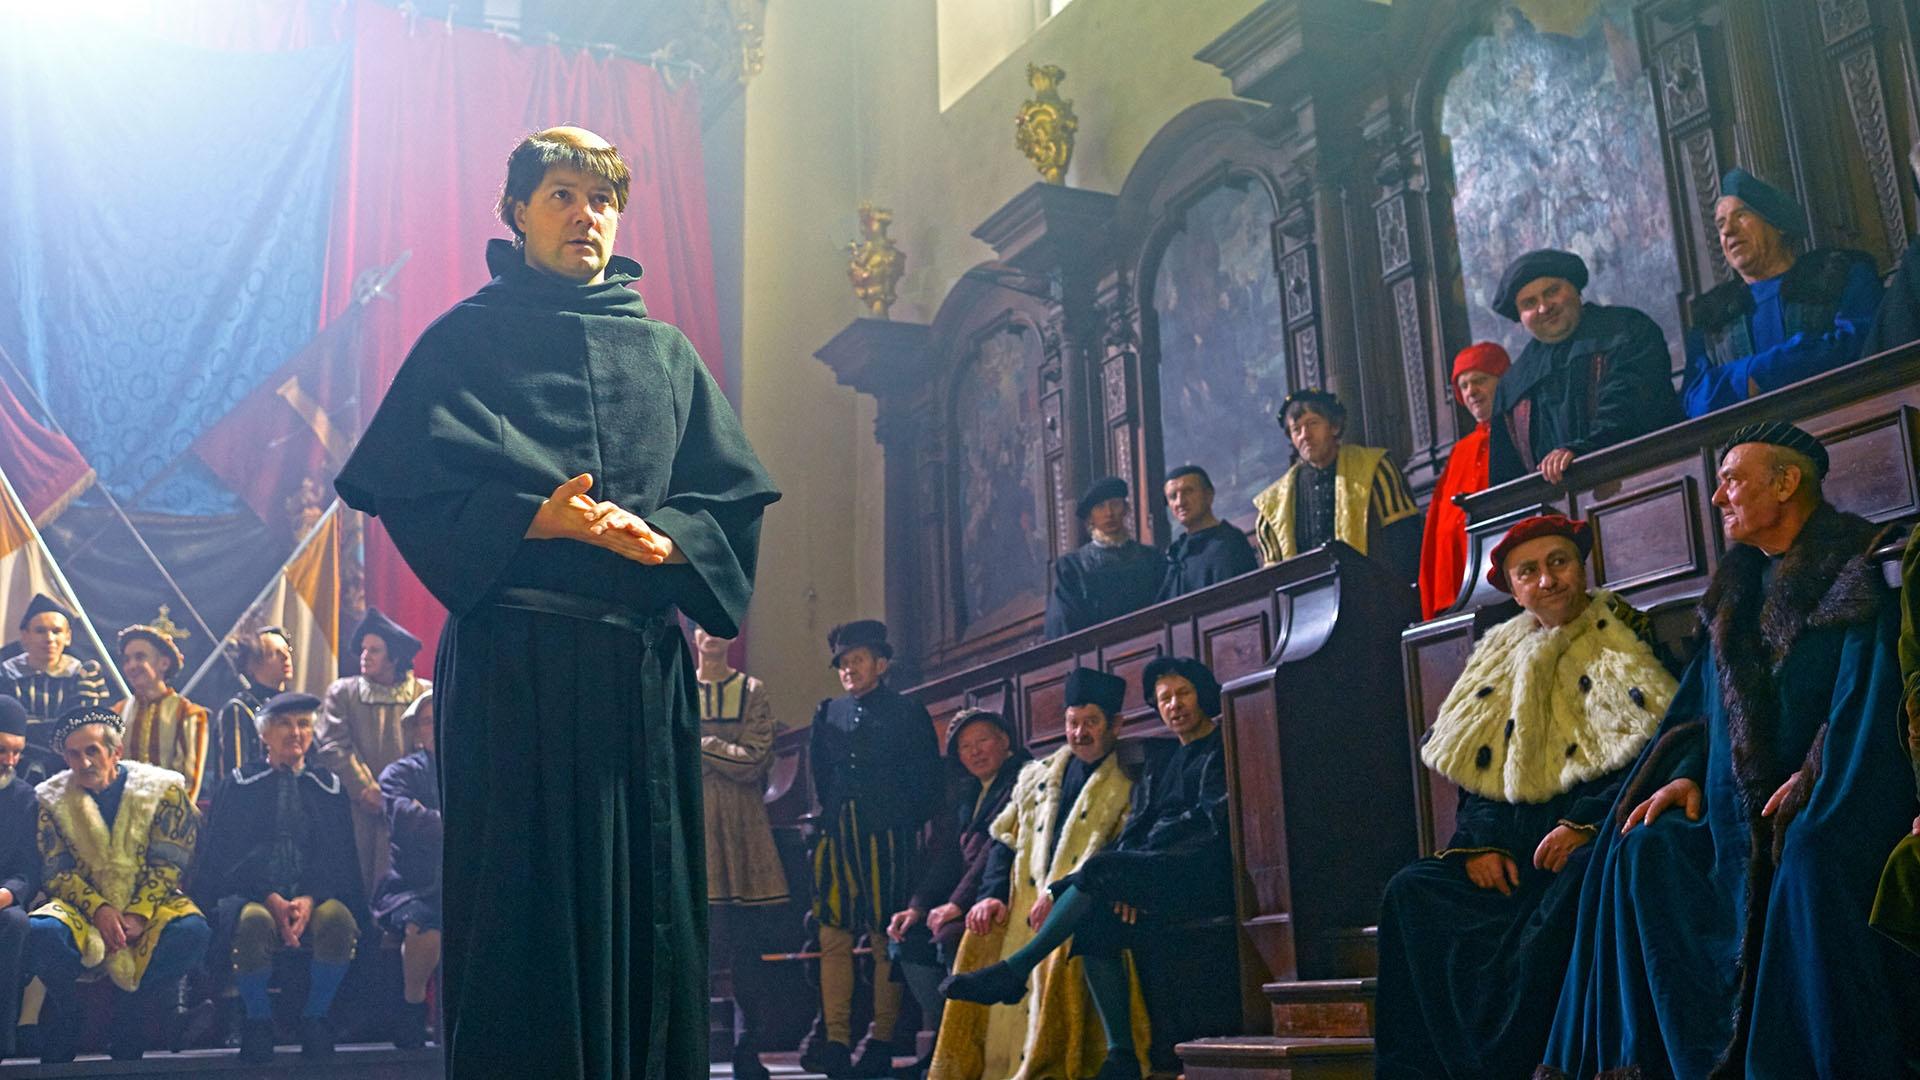 Padraic Delany as Martin Luther at the Diet of Worms in 1517.